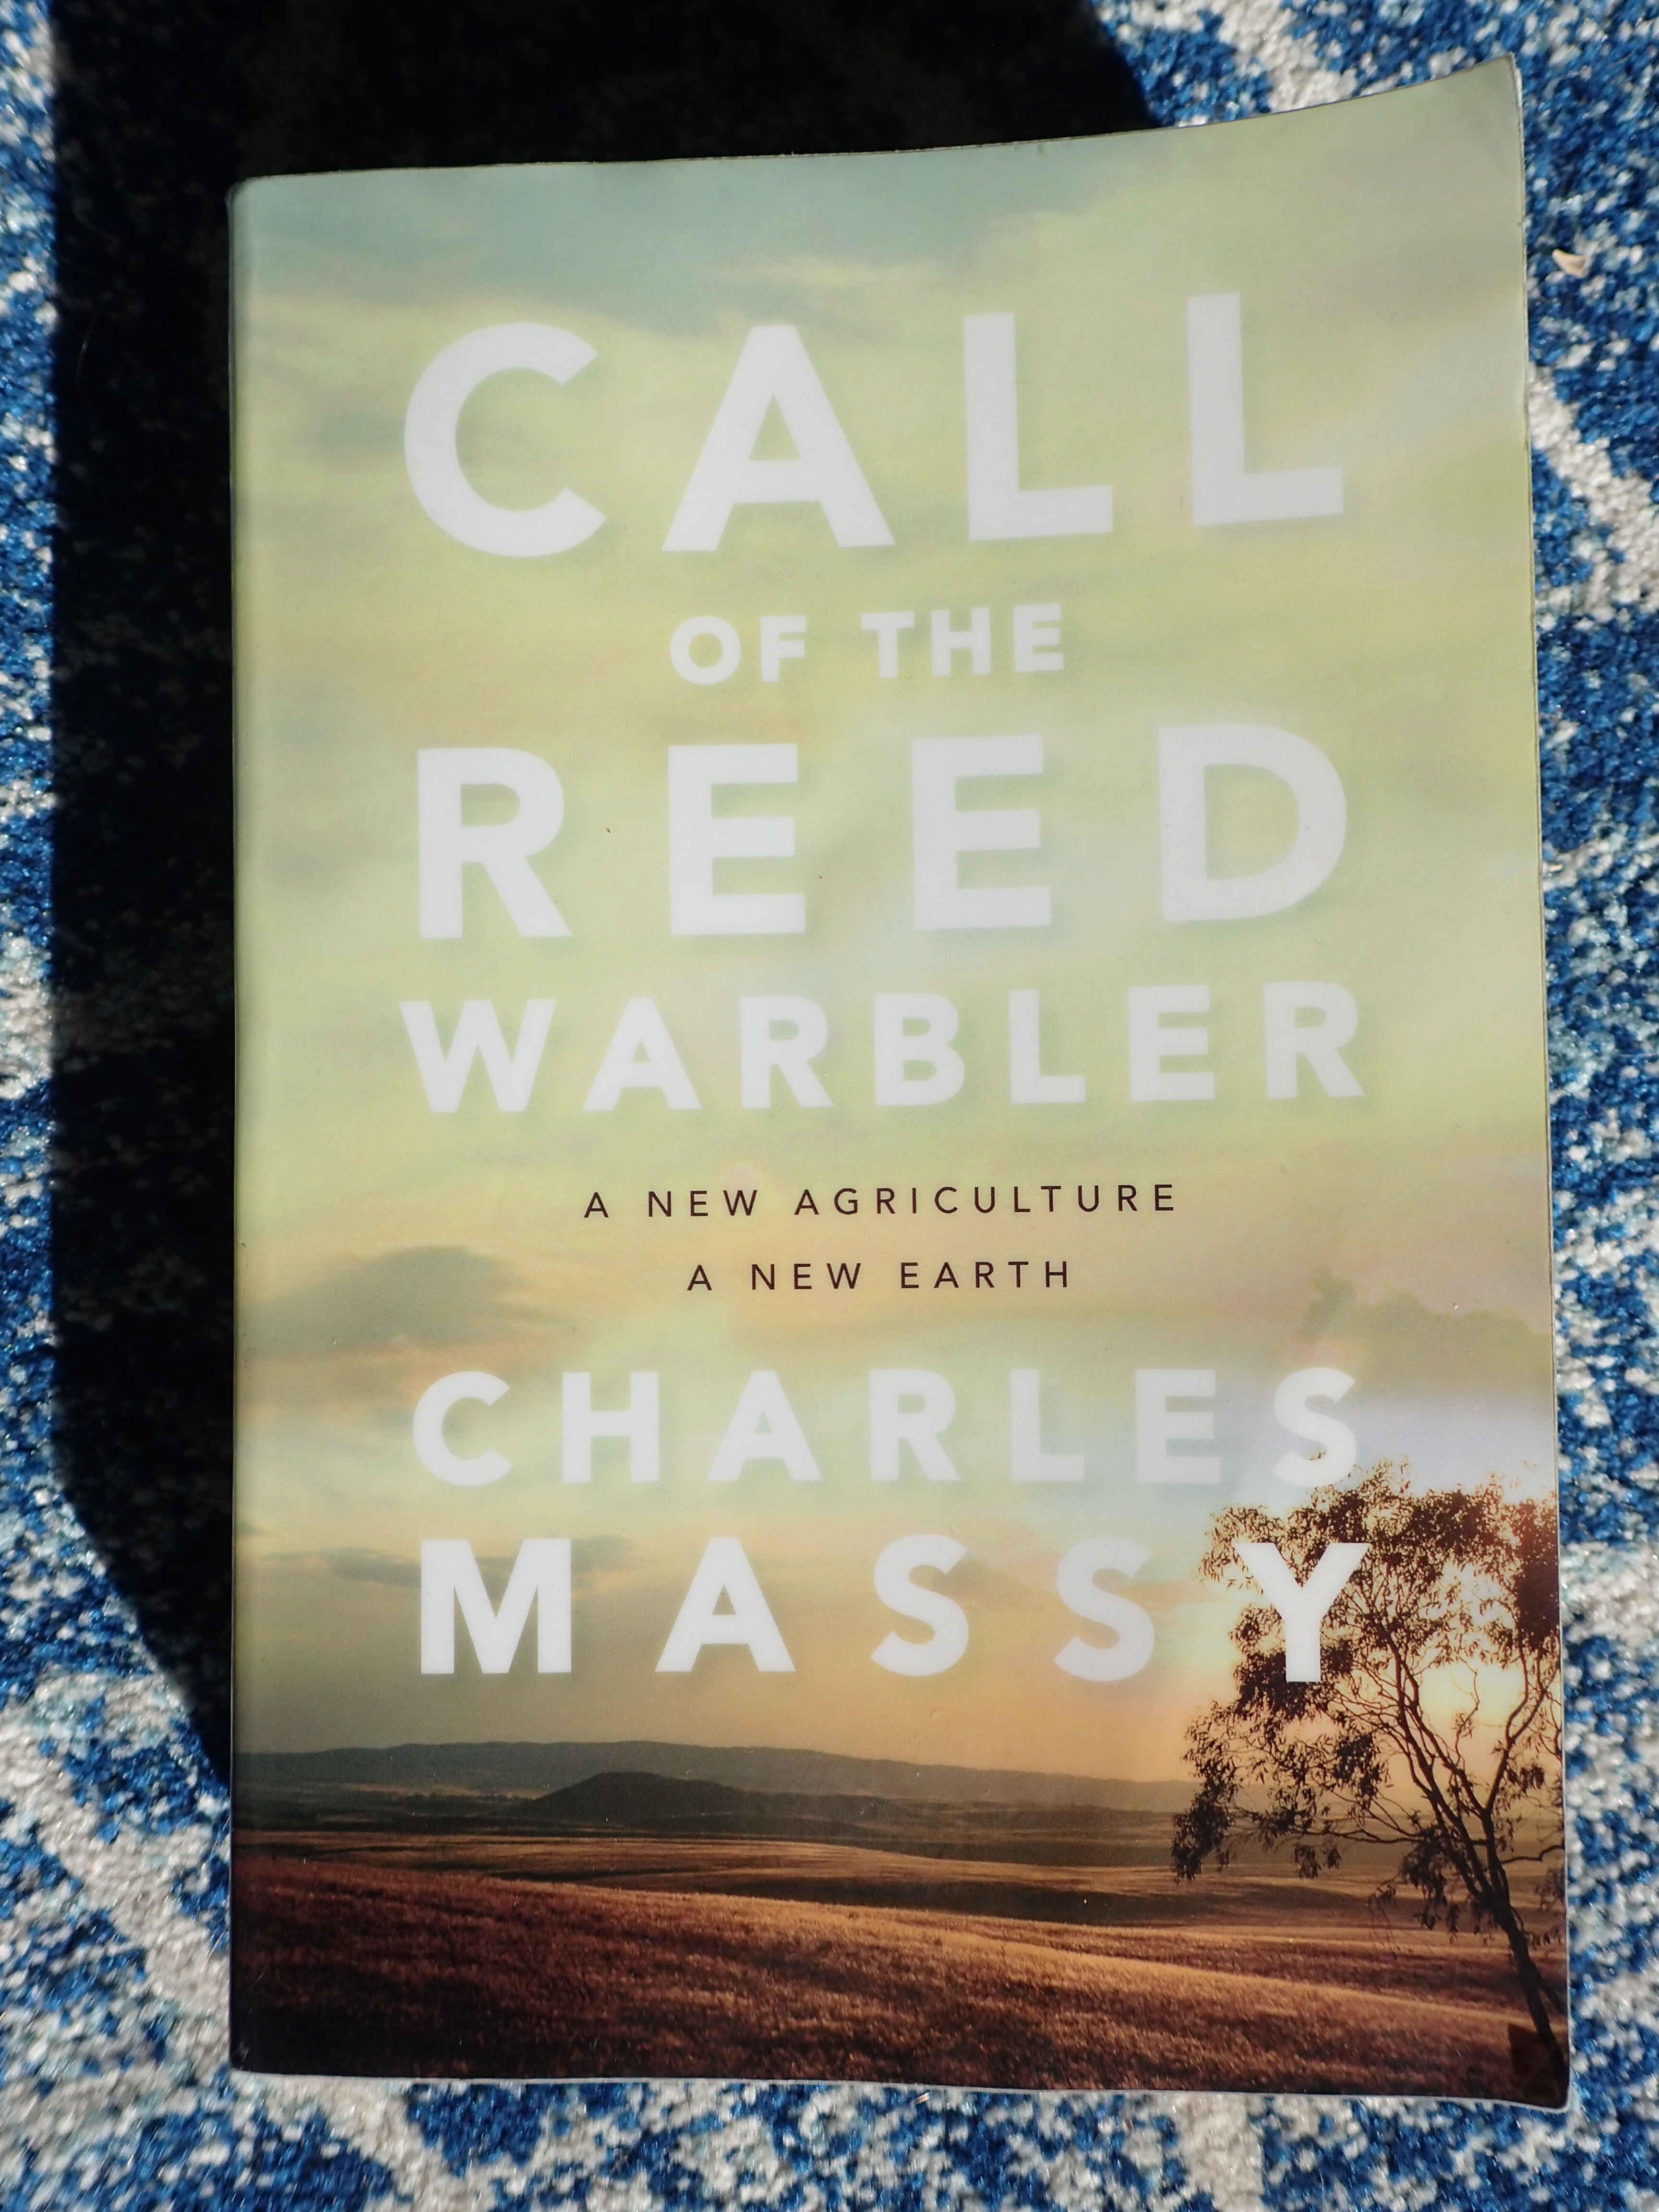 A photo of the book cover